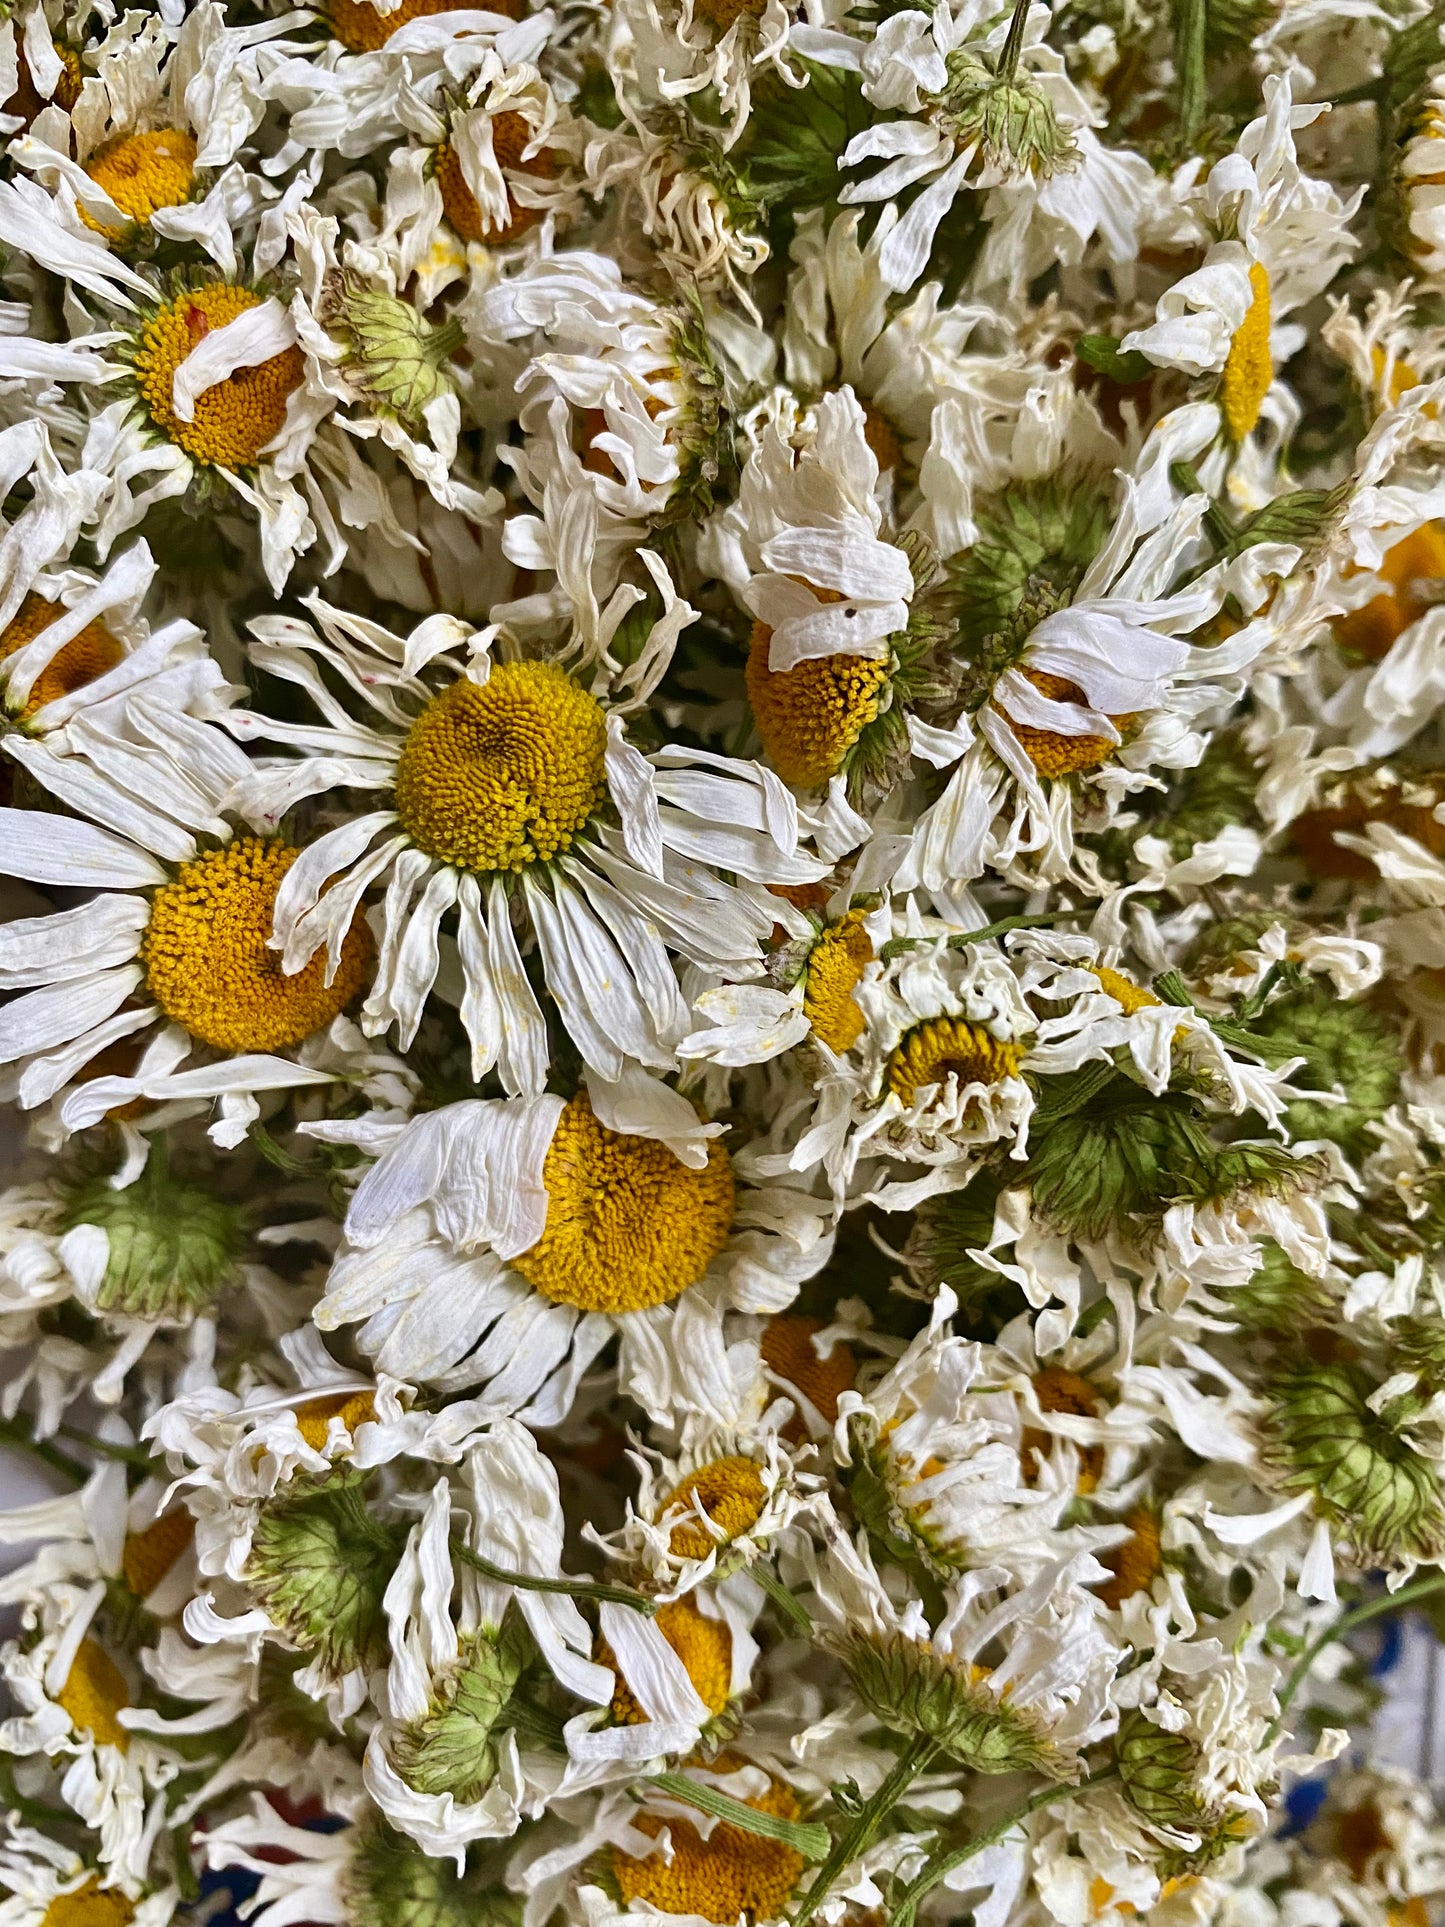 Daisies 100% natural - Product of Quebec 